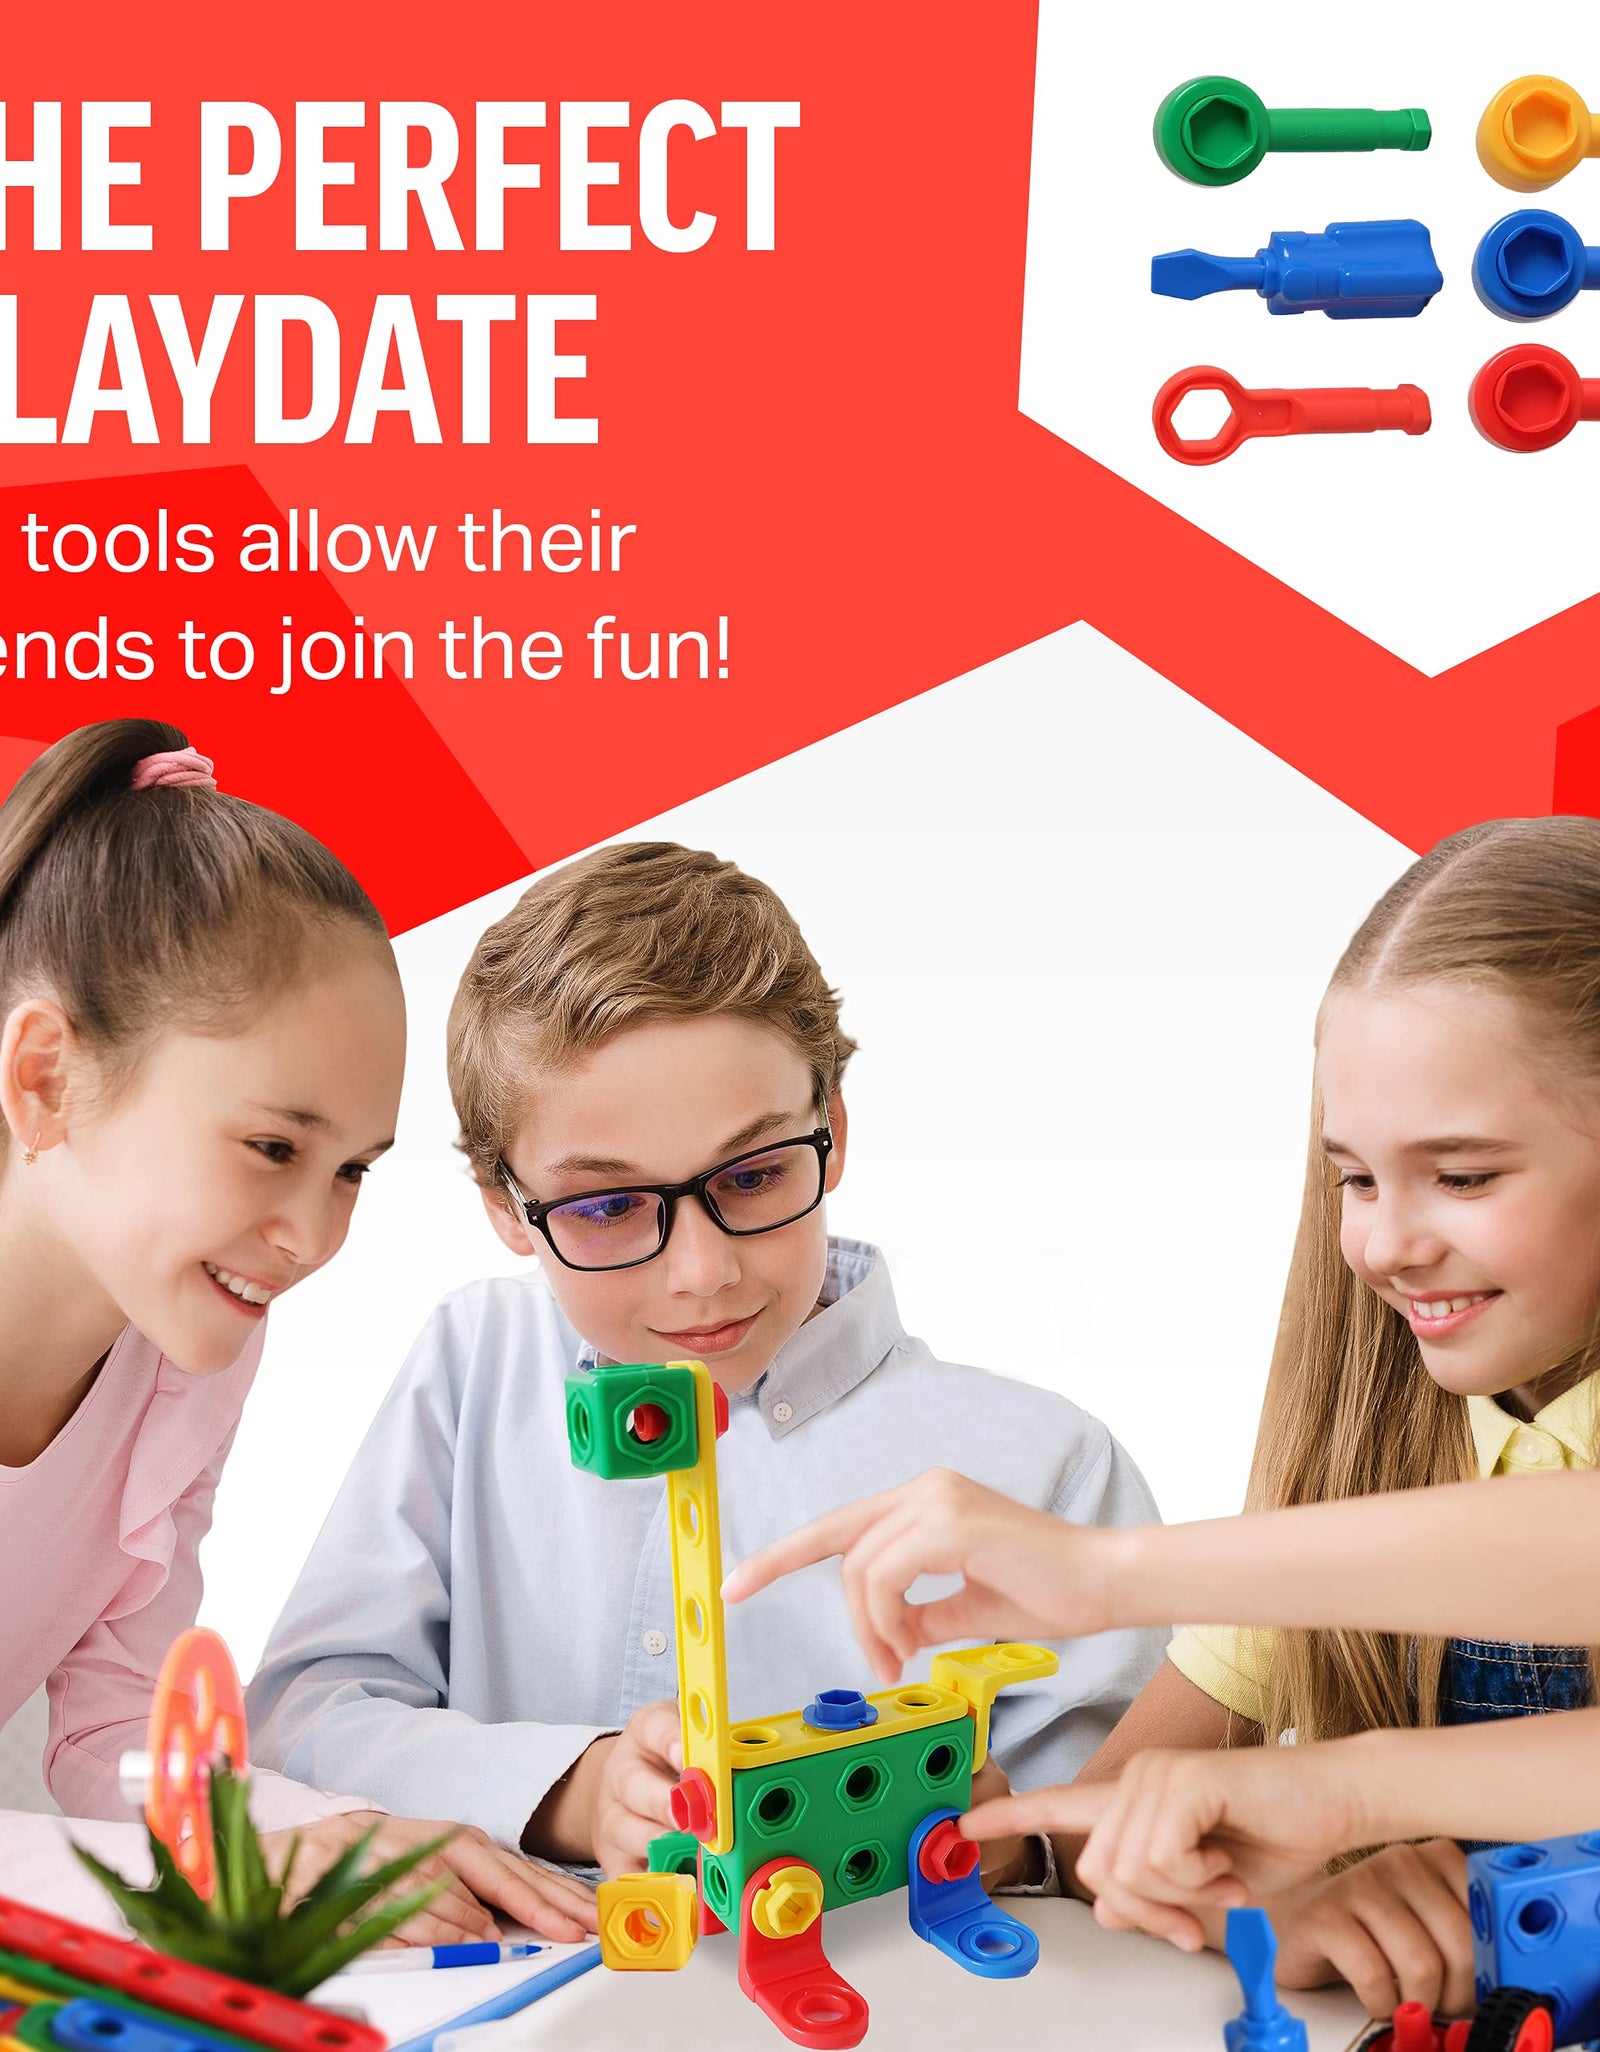 Brickyard Building Blocks STEM Toys & Activities - Educational Building Toys for Kids Ages 4-8 w/ 163 Pieces, Kid-Friendly Tools, Design Guide and Toy Storage Box